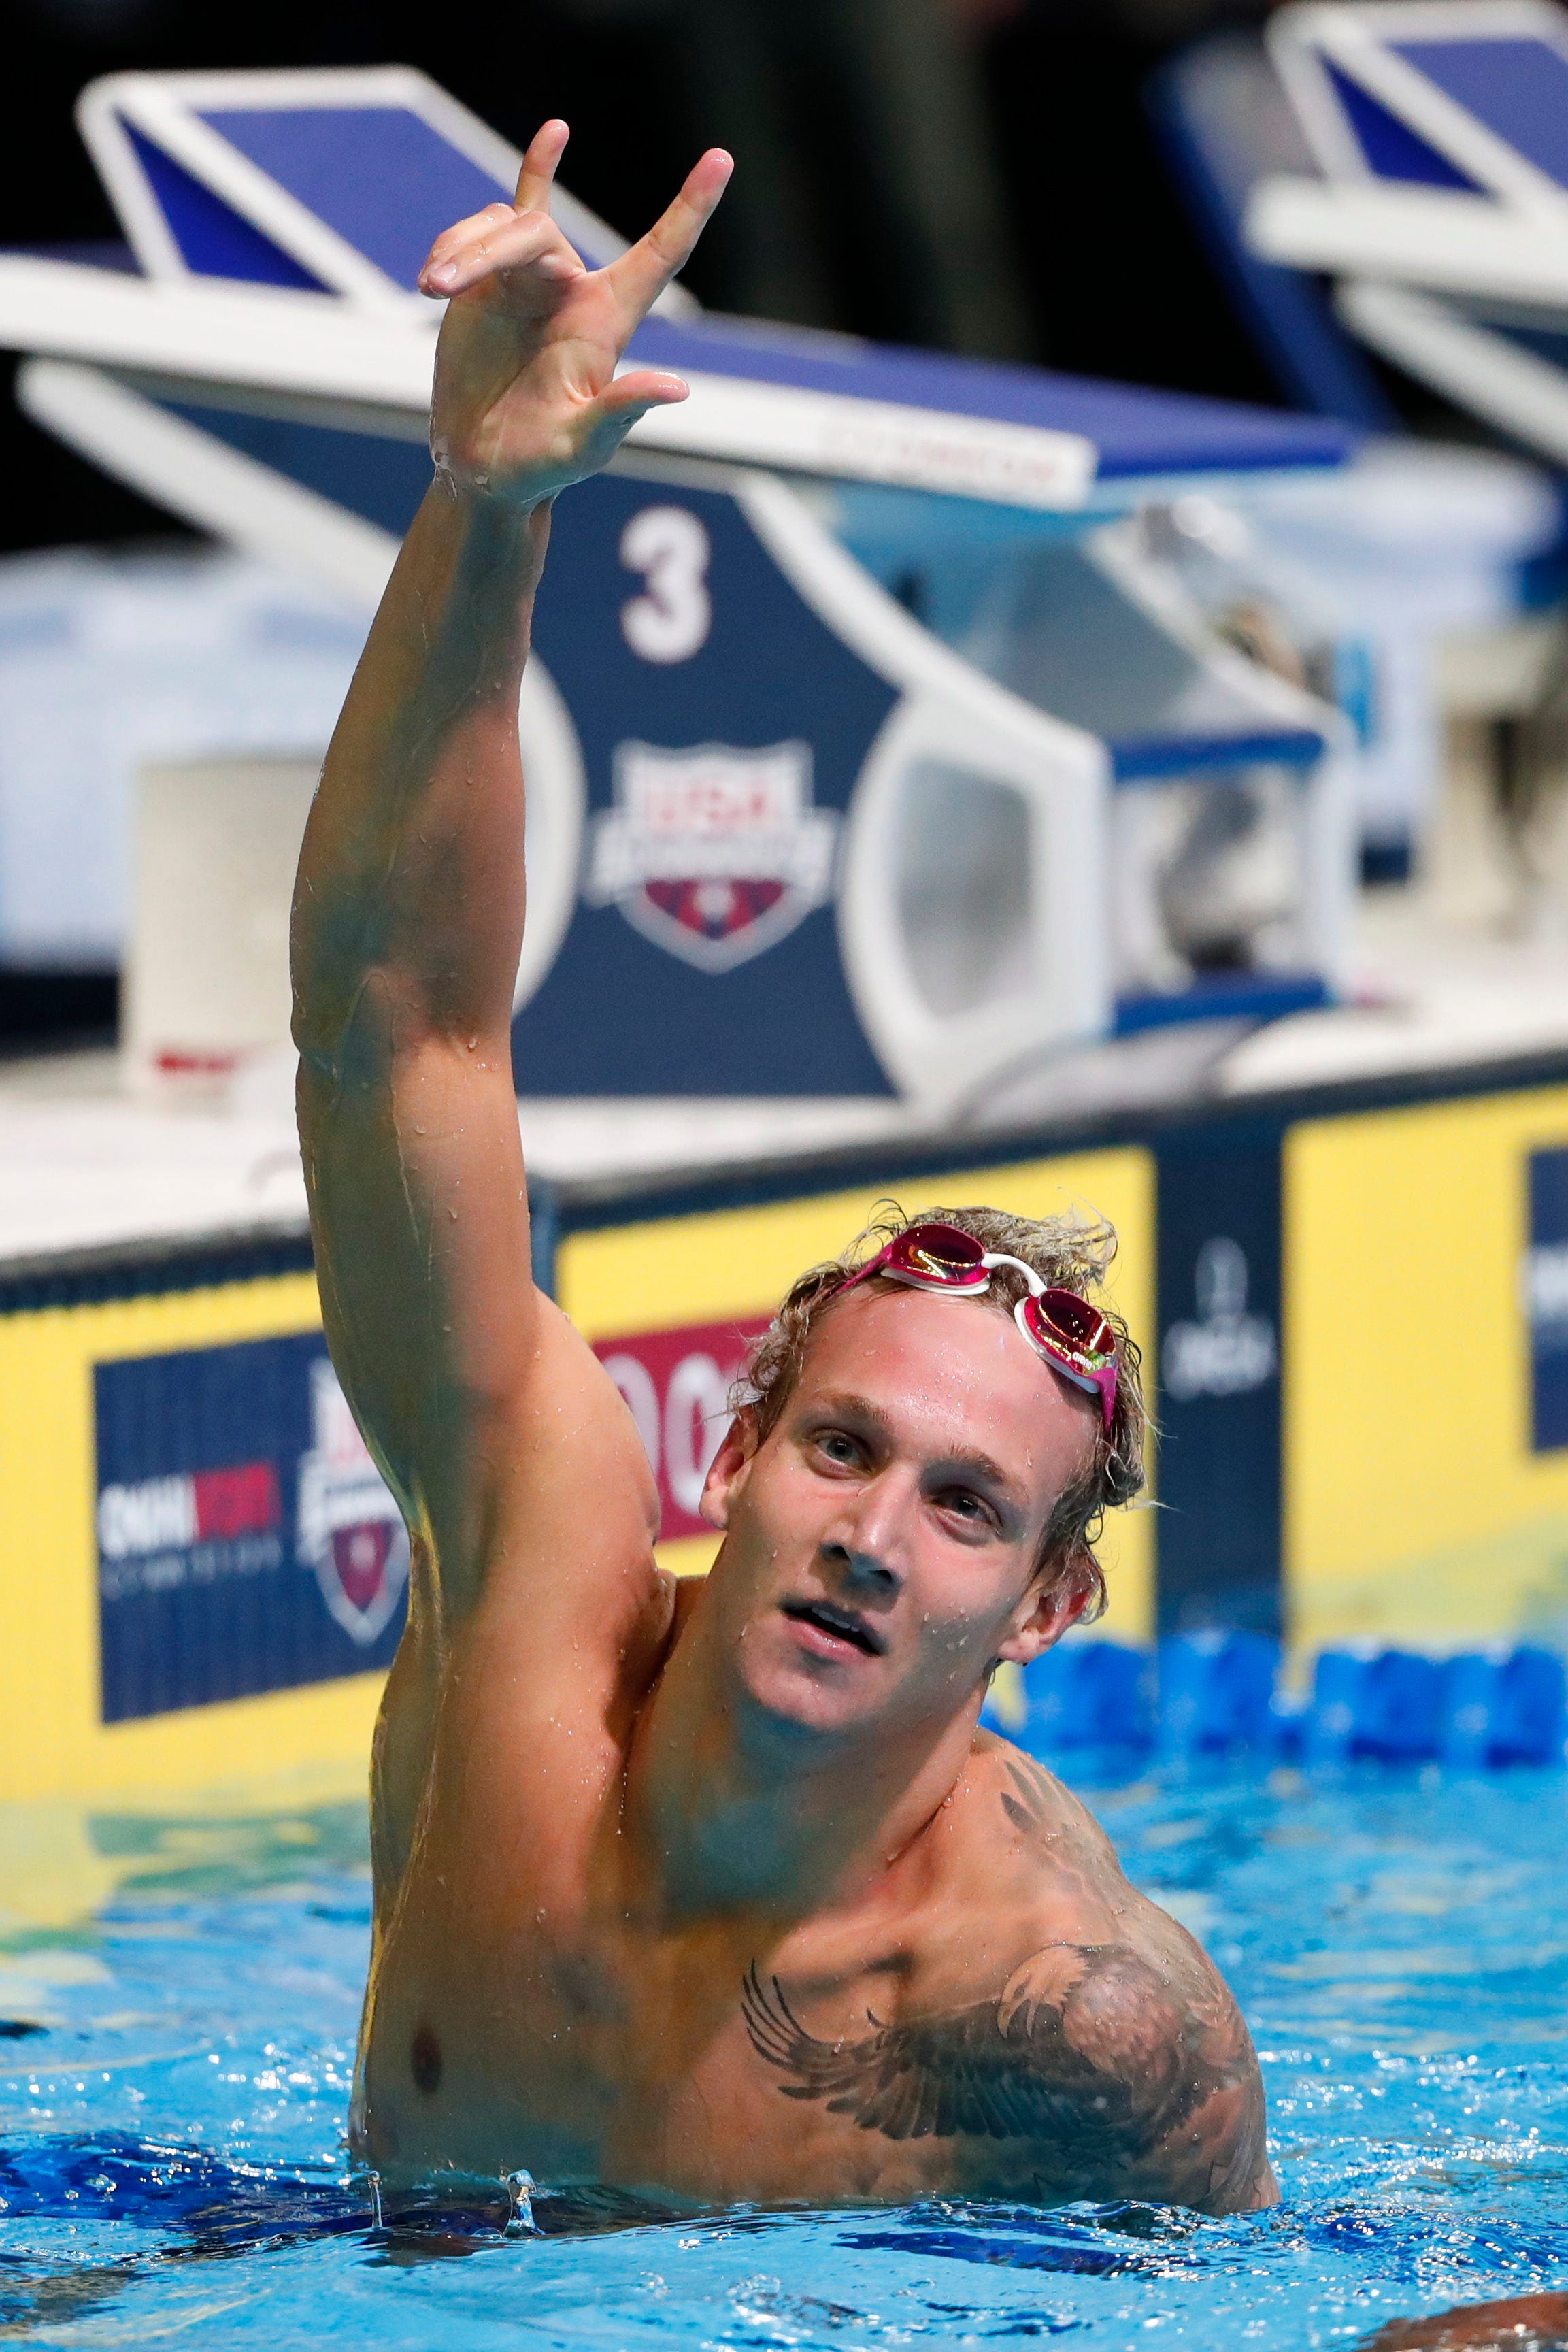 Caeleb Dressel celebrates after completing the Men's 100 Meter Freestyle finals in the U.S. Olympic swimming team trials at CenturyLink Center on June 30, 2016.